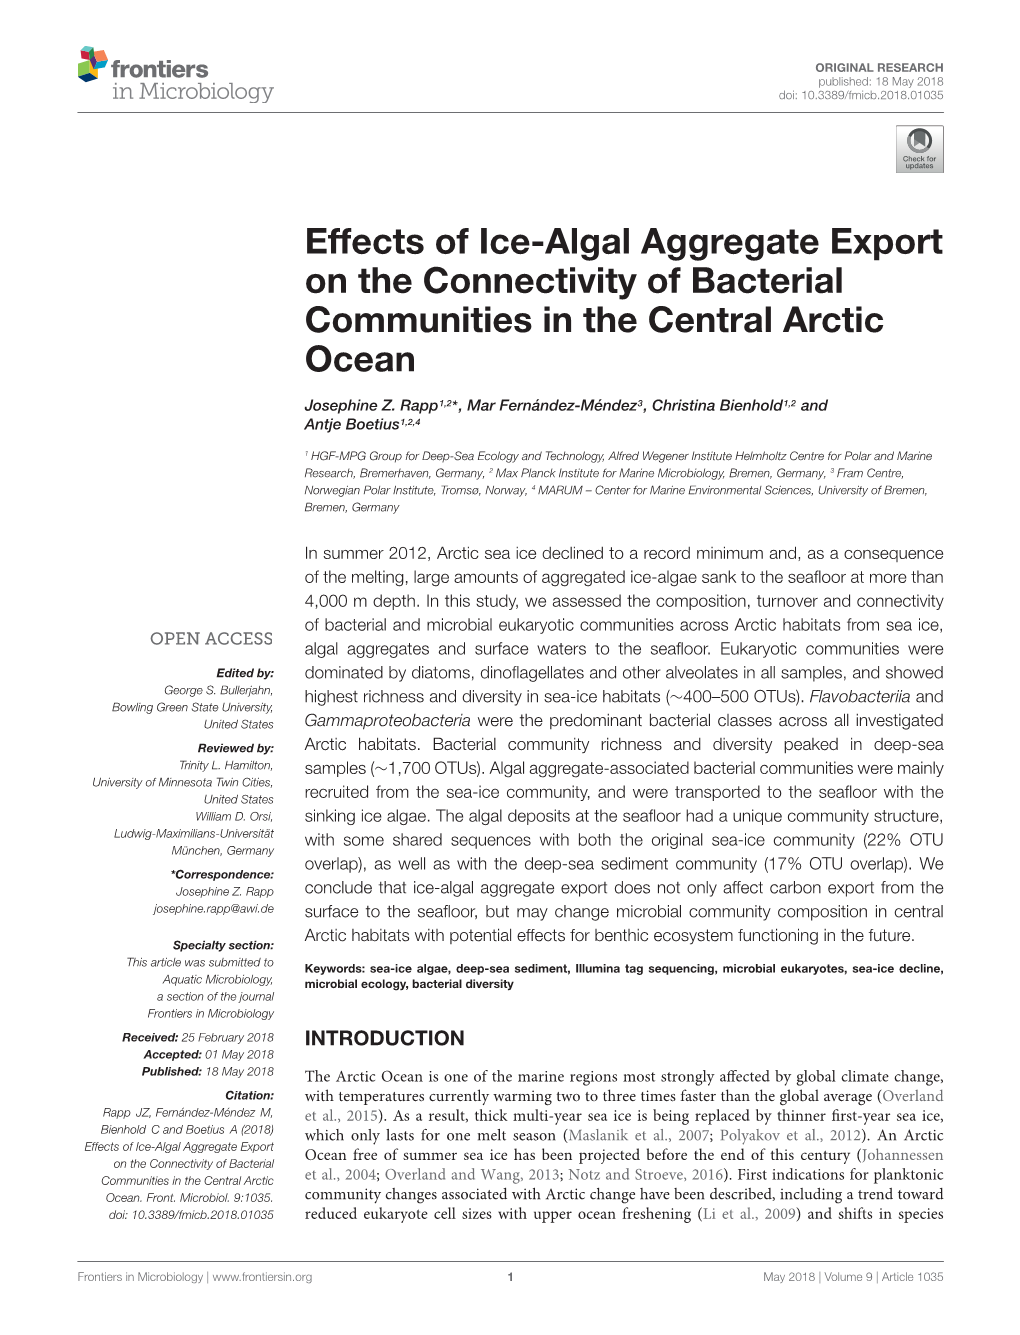 Effects of Ice-Algal Aggregate Export on the Connectivity of Bacterial Communities in the Central Arctic Ocean